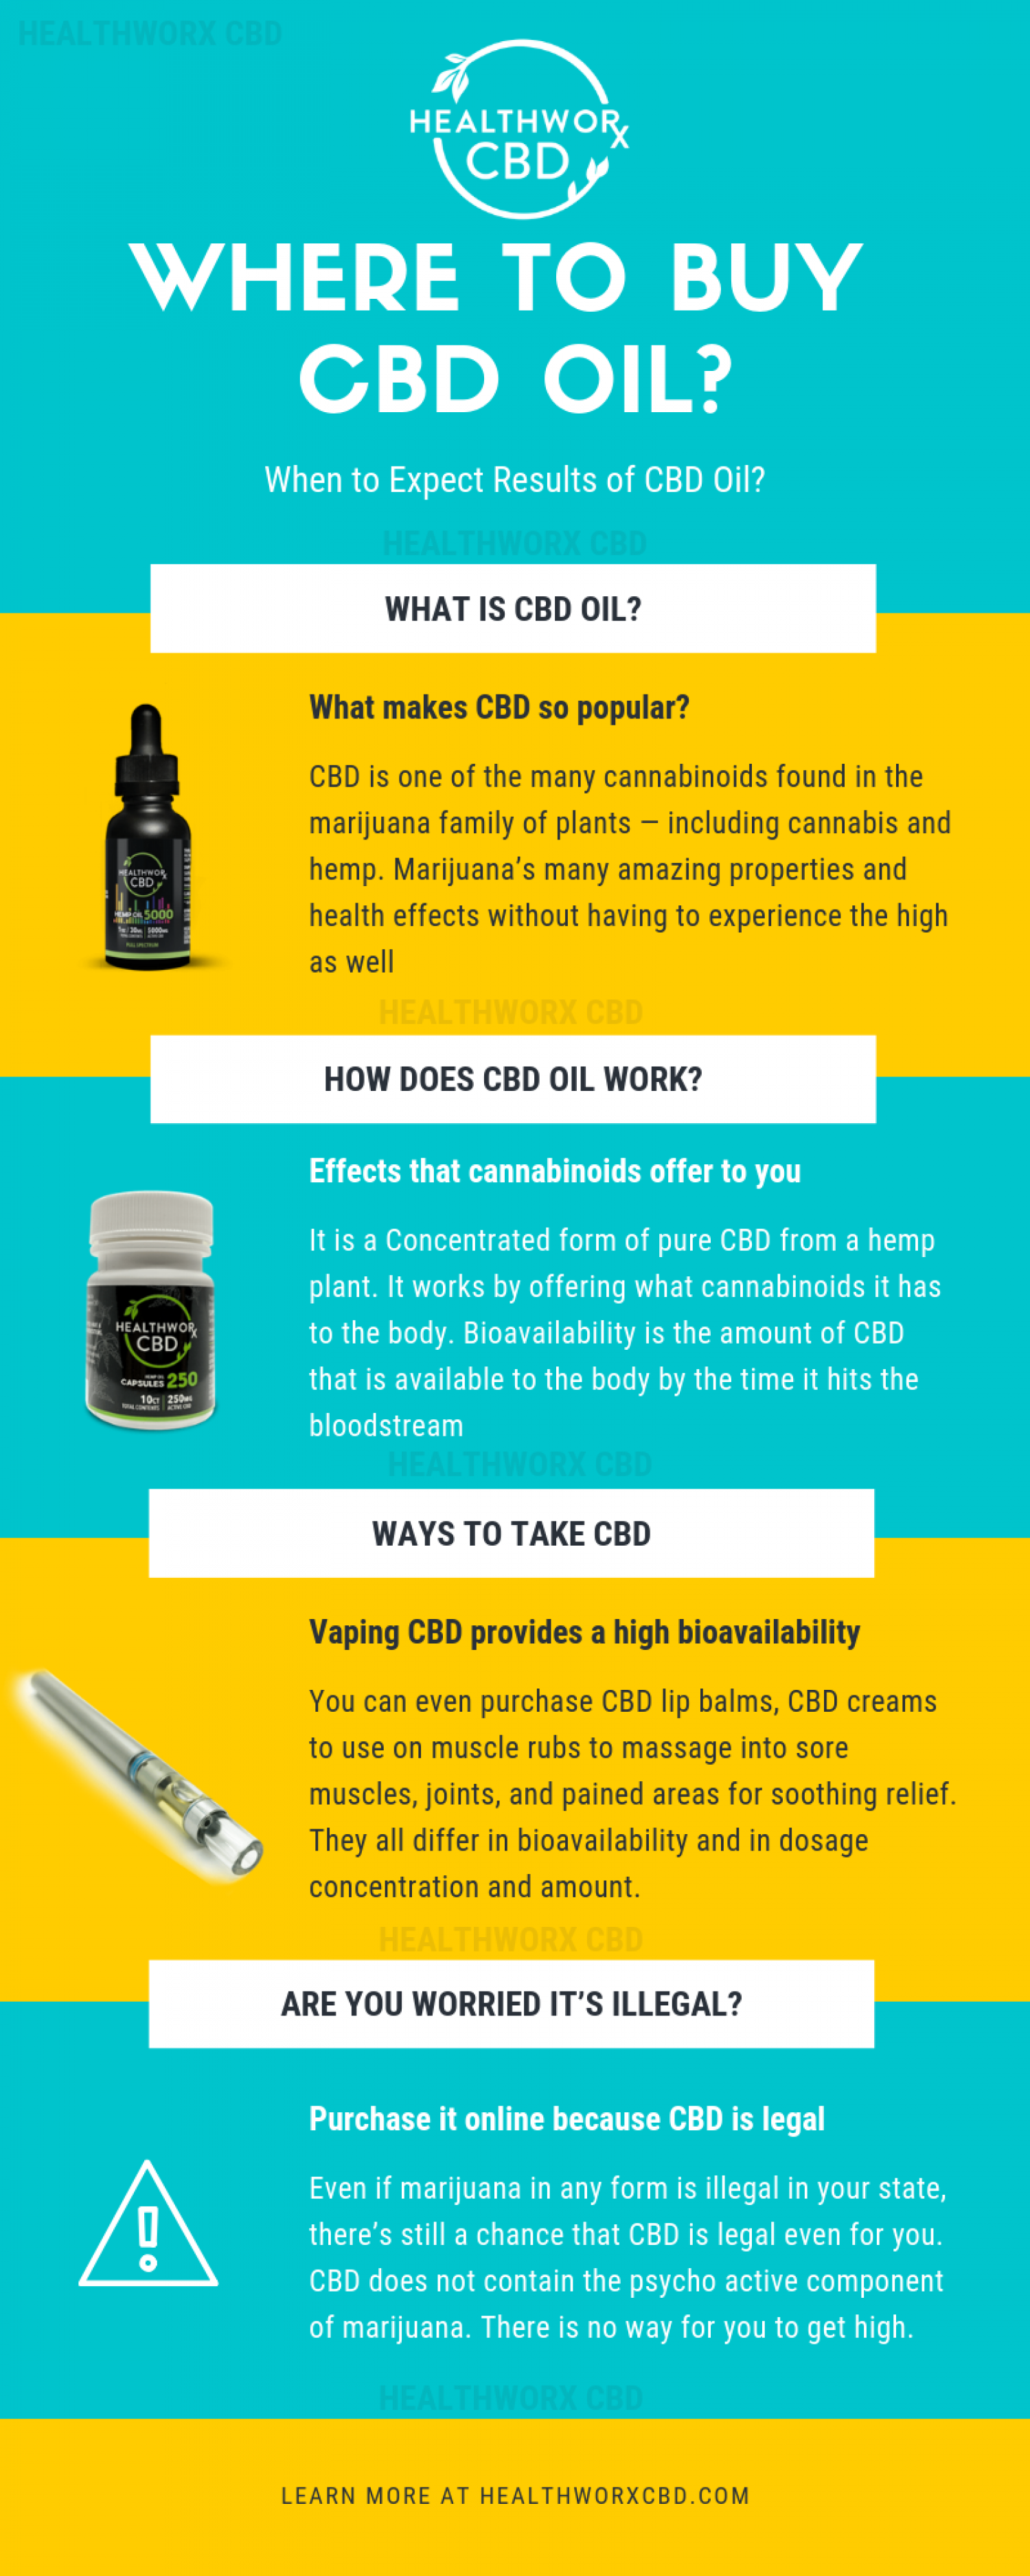 When to Expect Results of CBD Oil Infographic